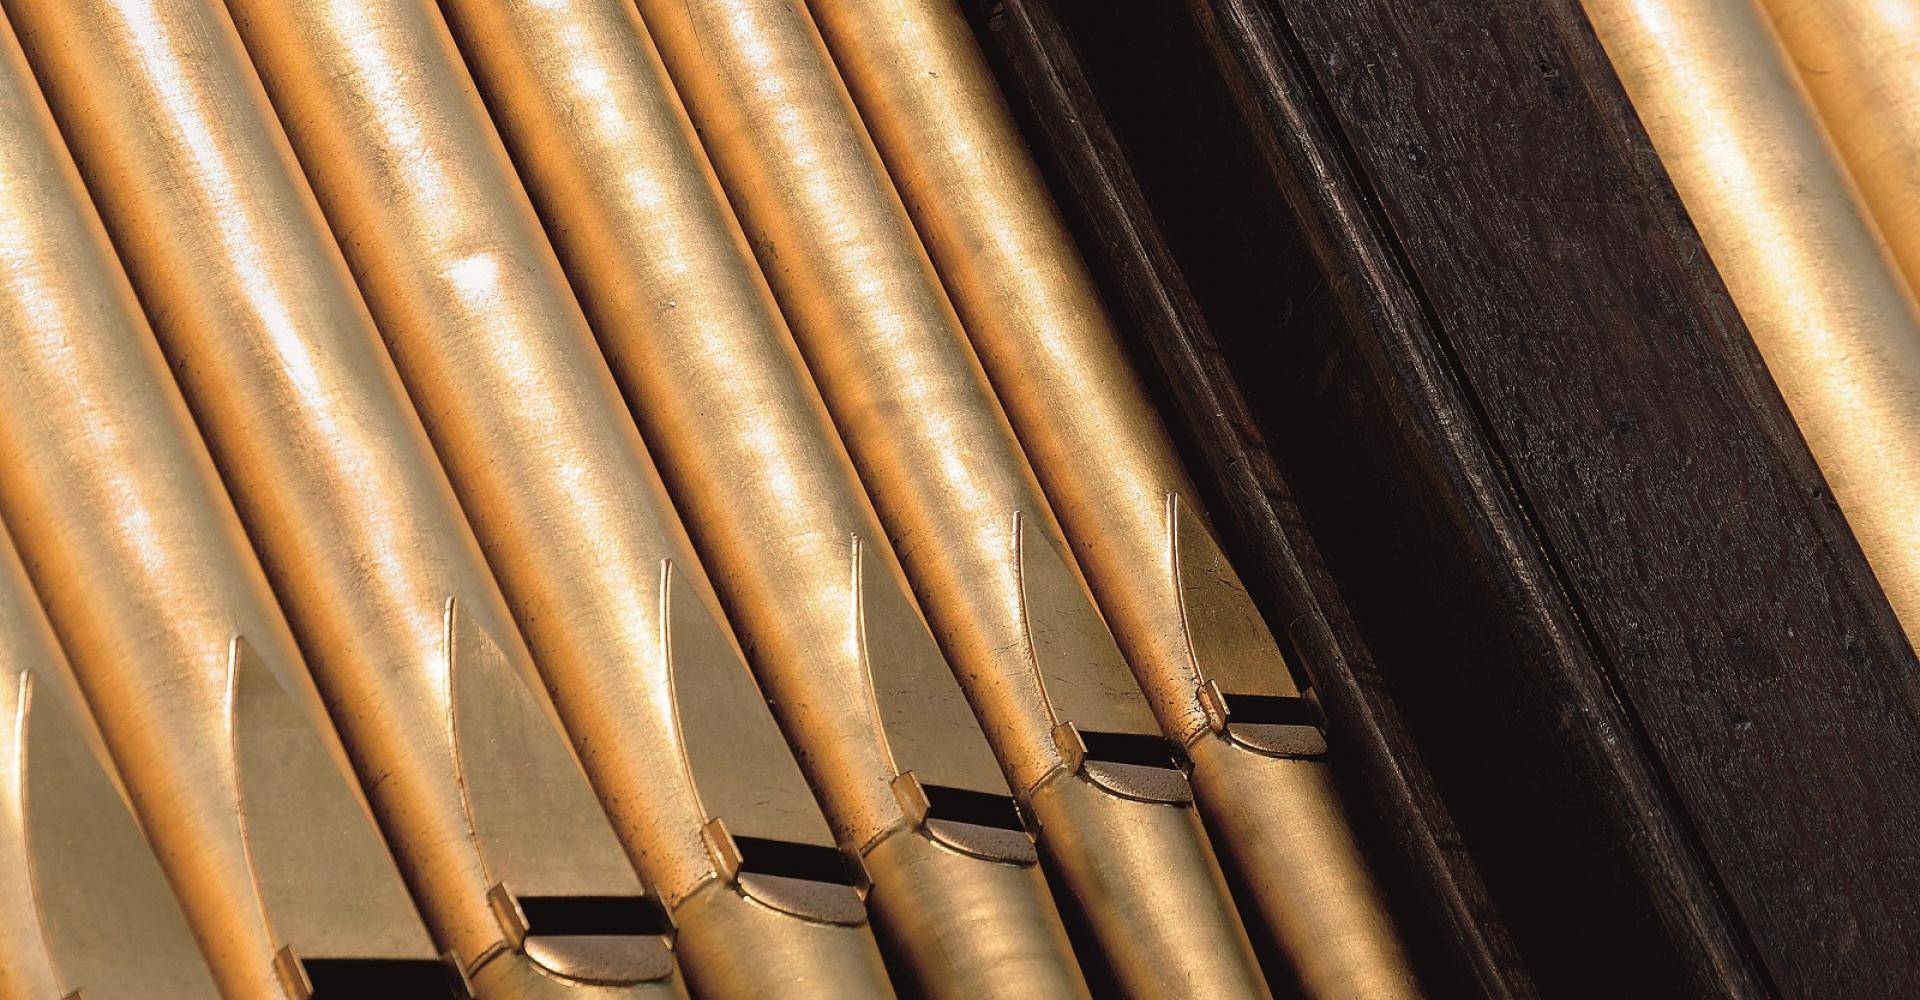 Pipework of the great organ